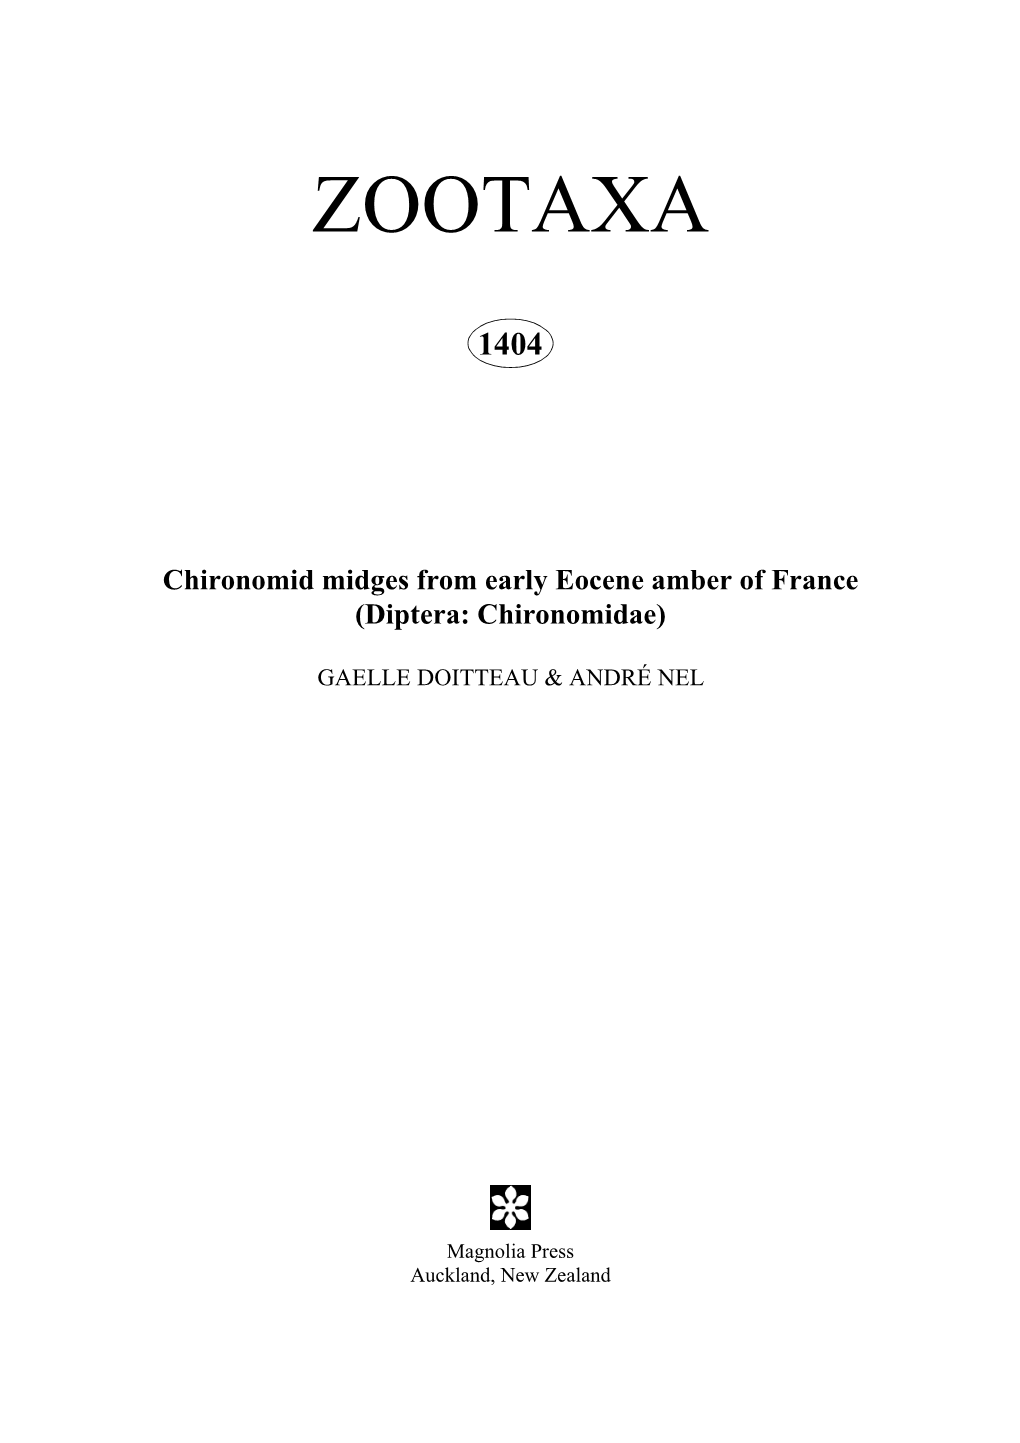 Zootaxa: Chironomid Midges from Early Eocene Amber of France